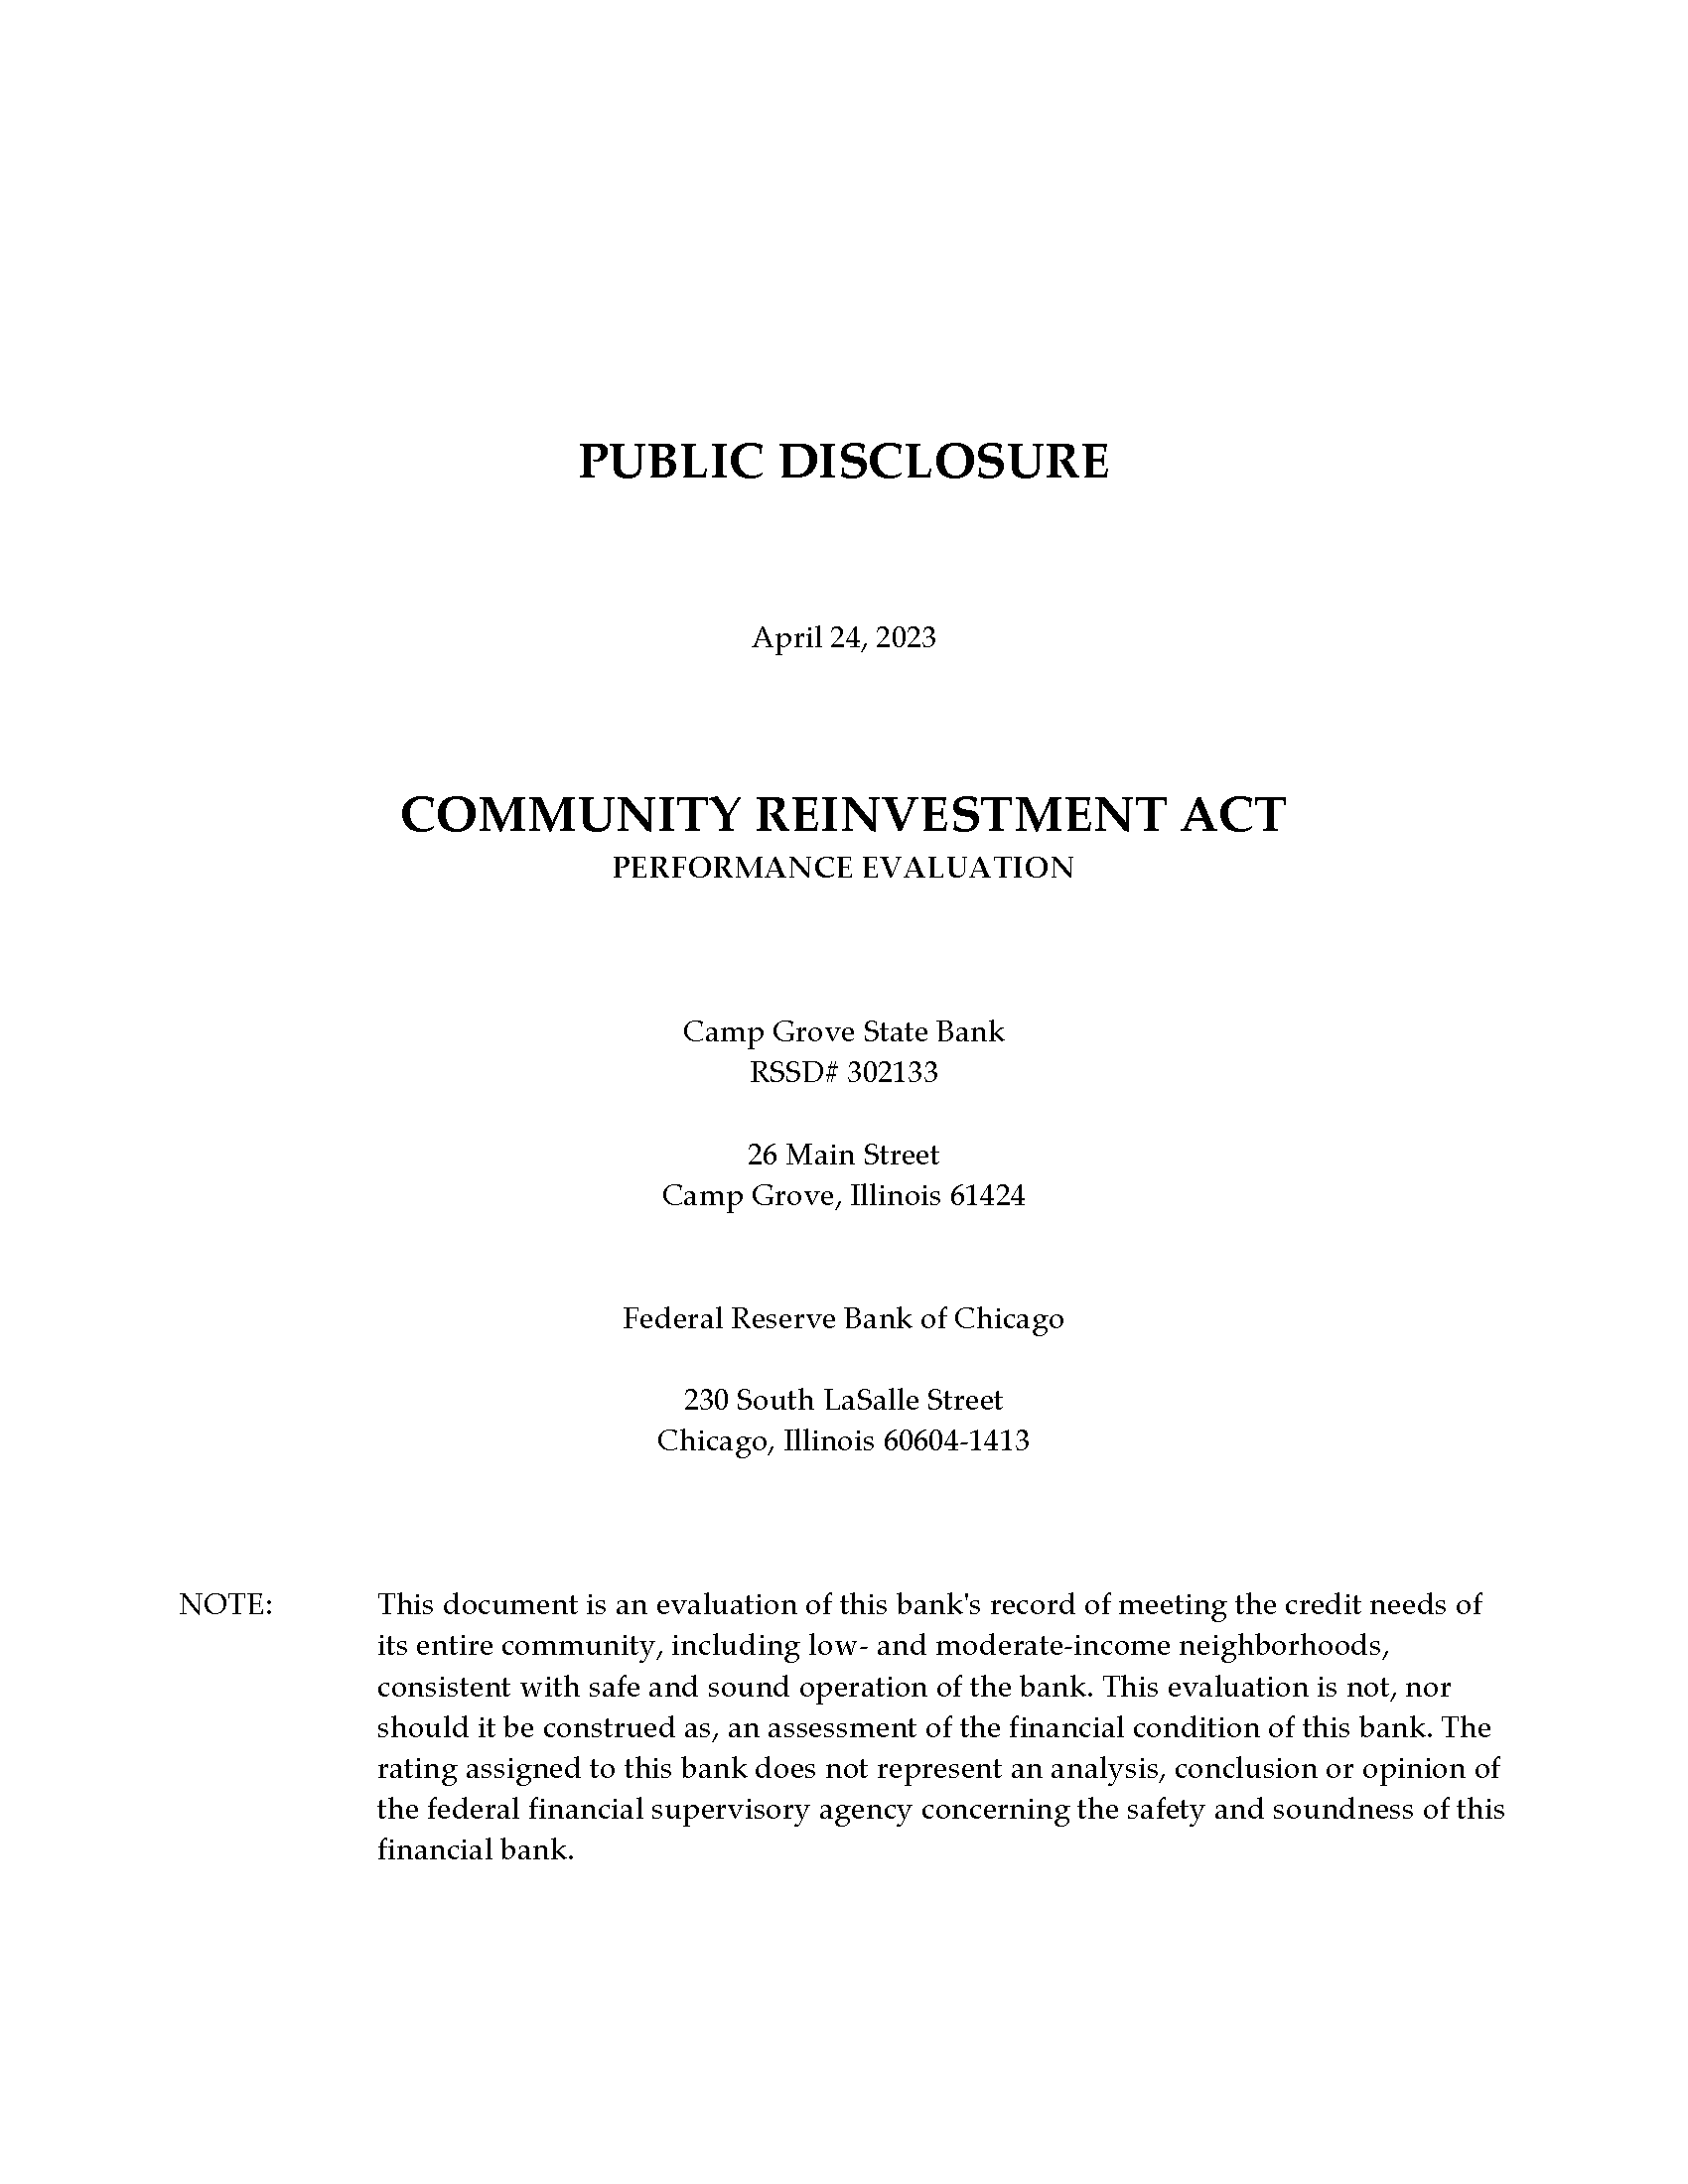 Community Reinvestment Act Page 3